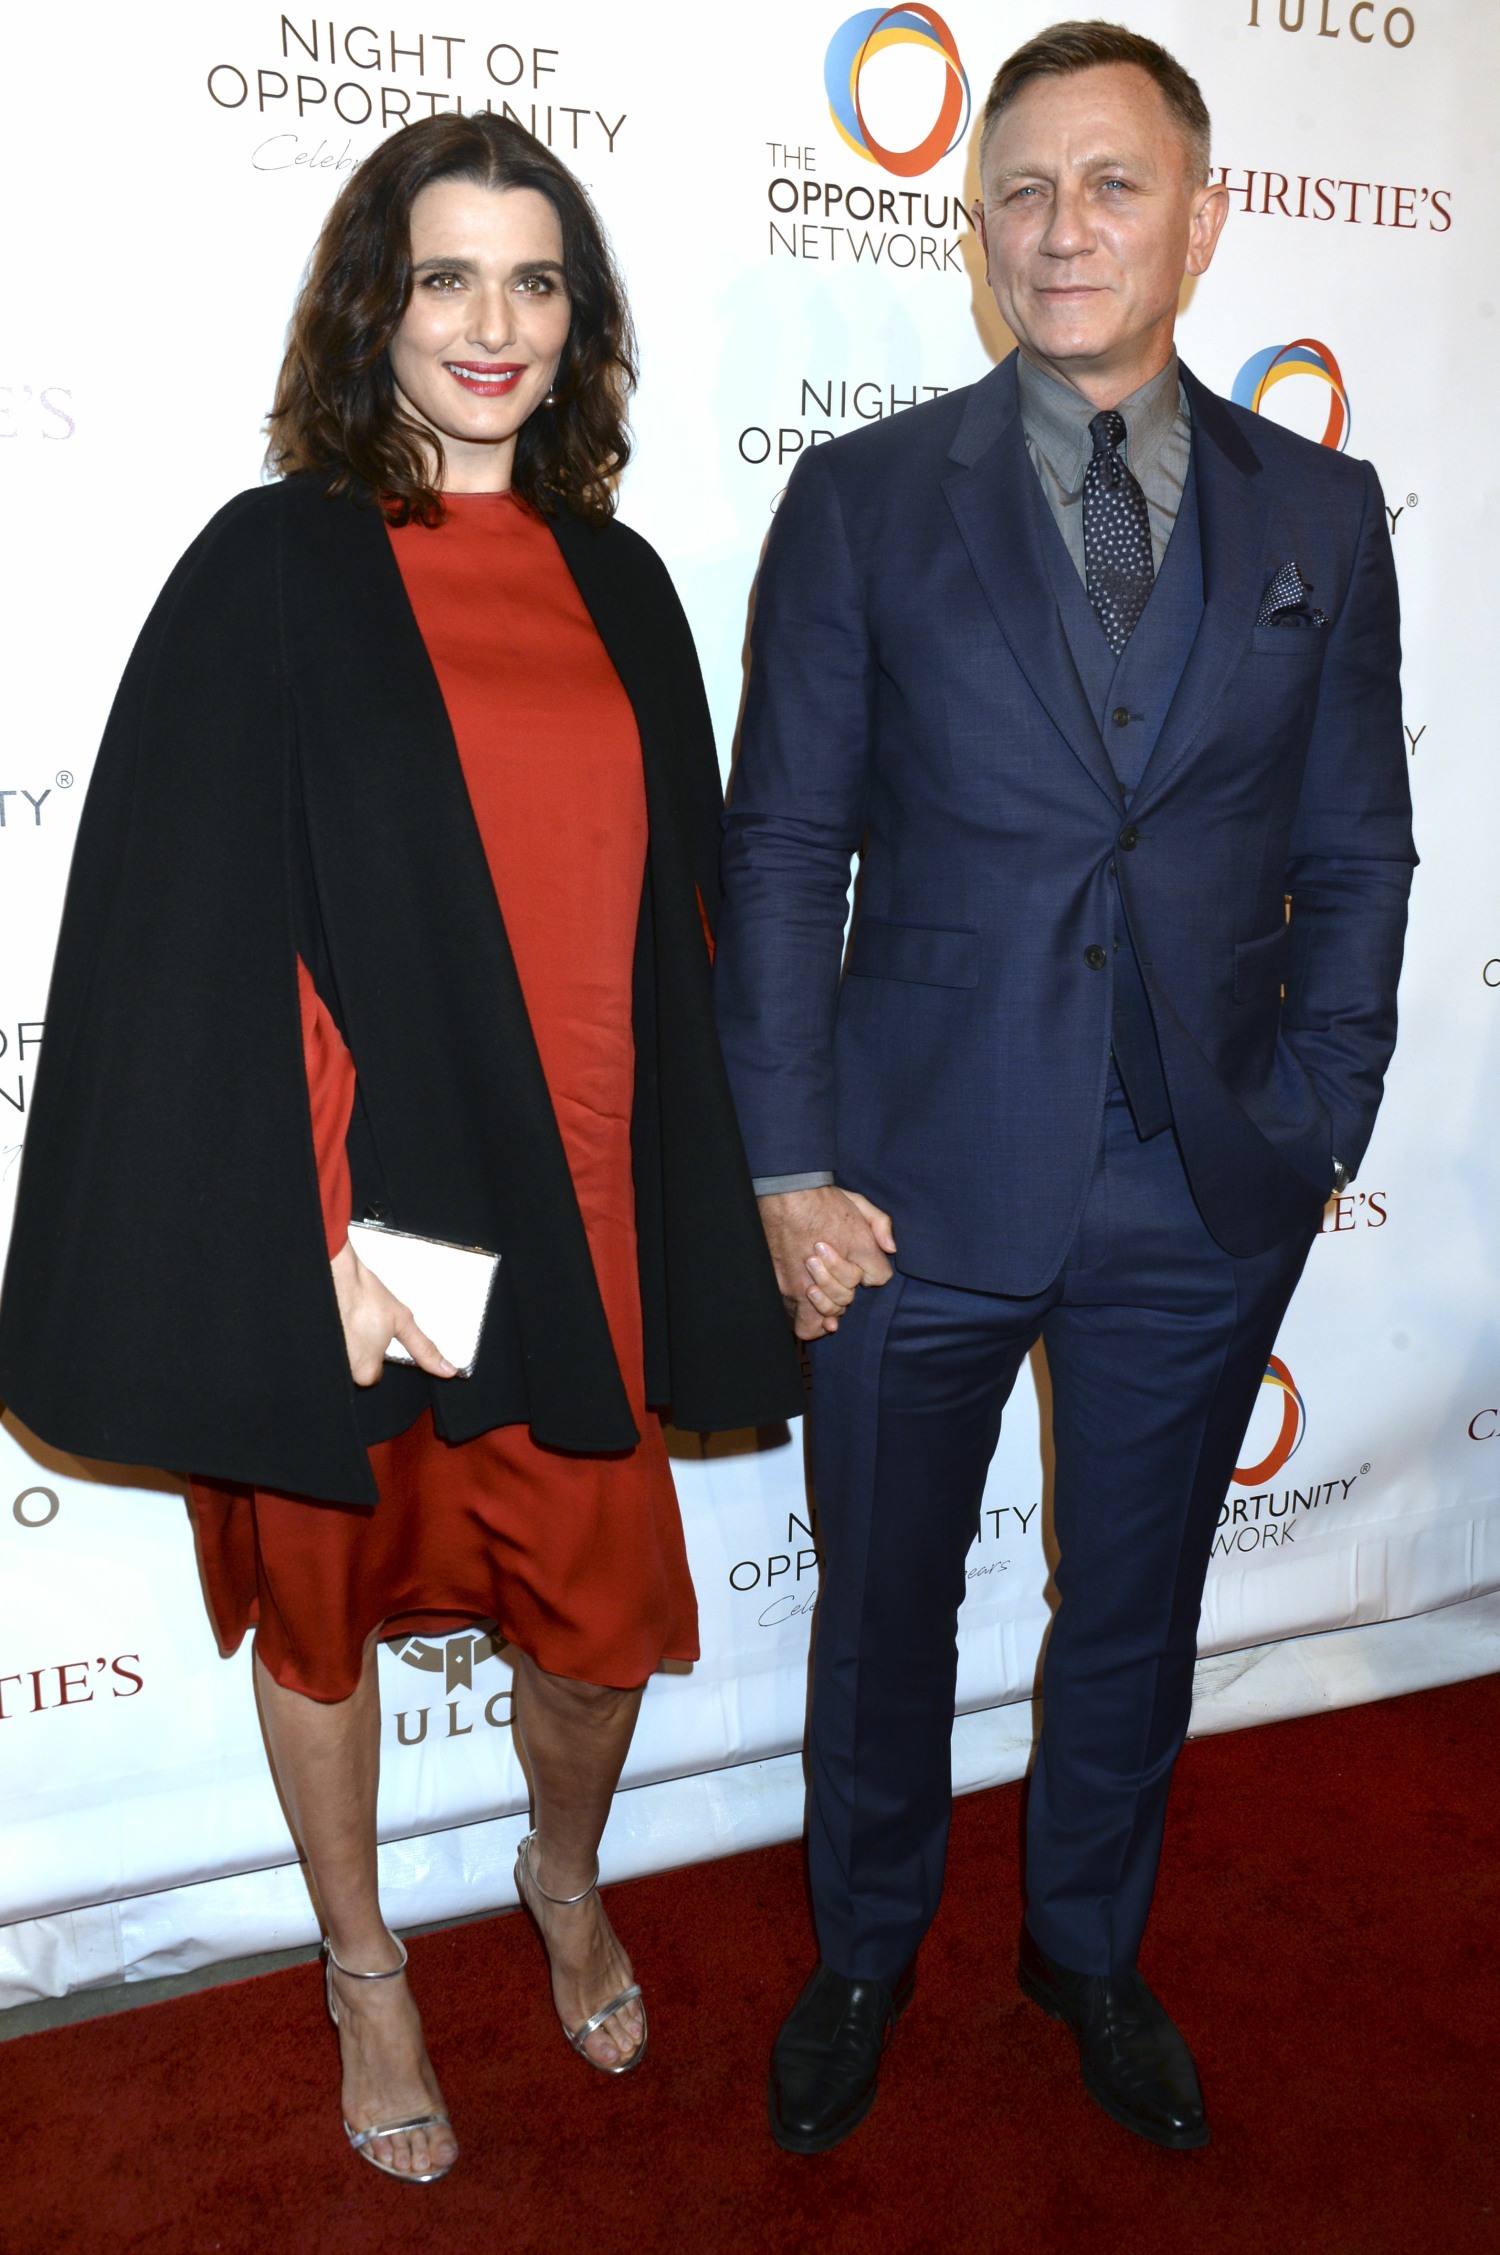 11th Annual Night of Opportunity Gala - Arrivals